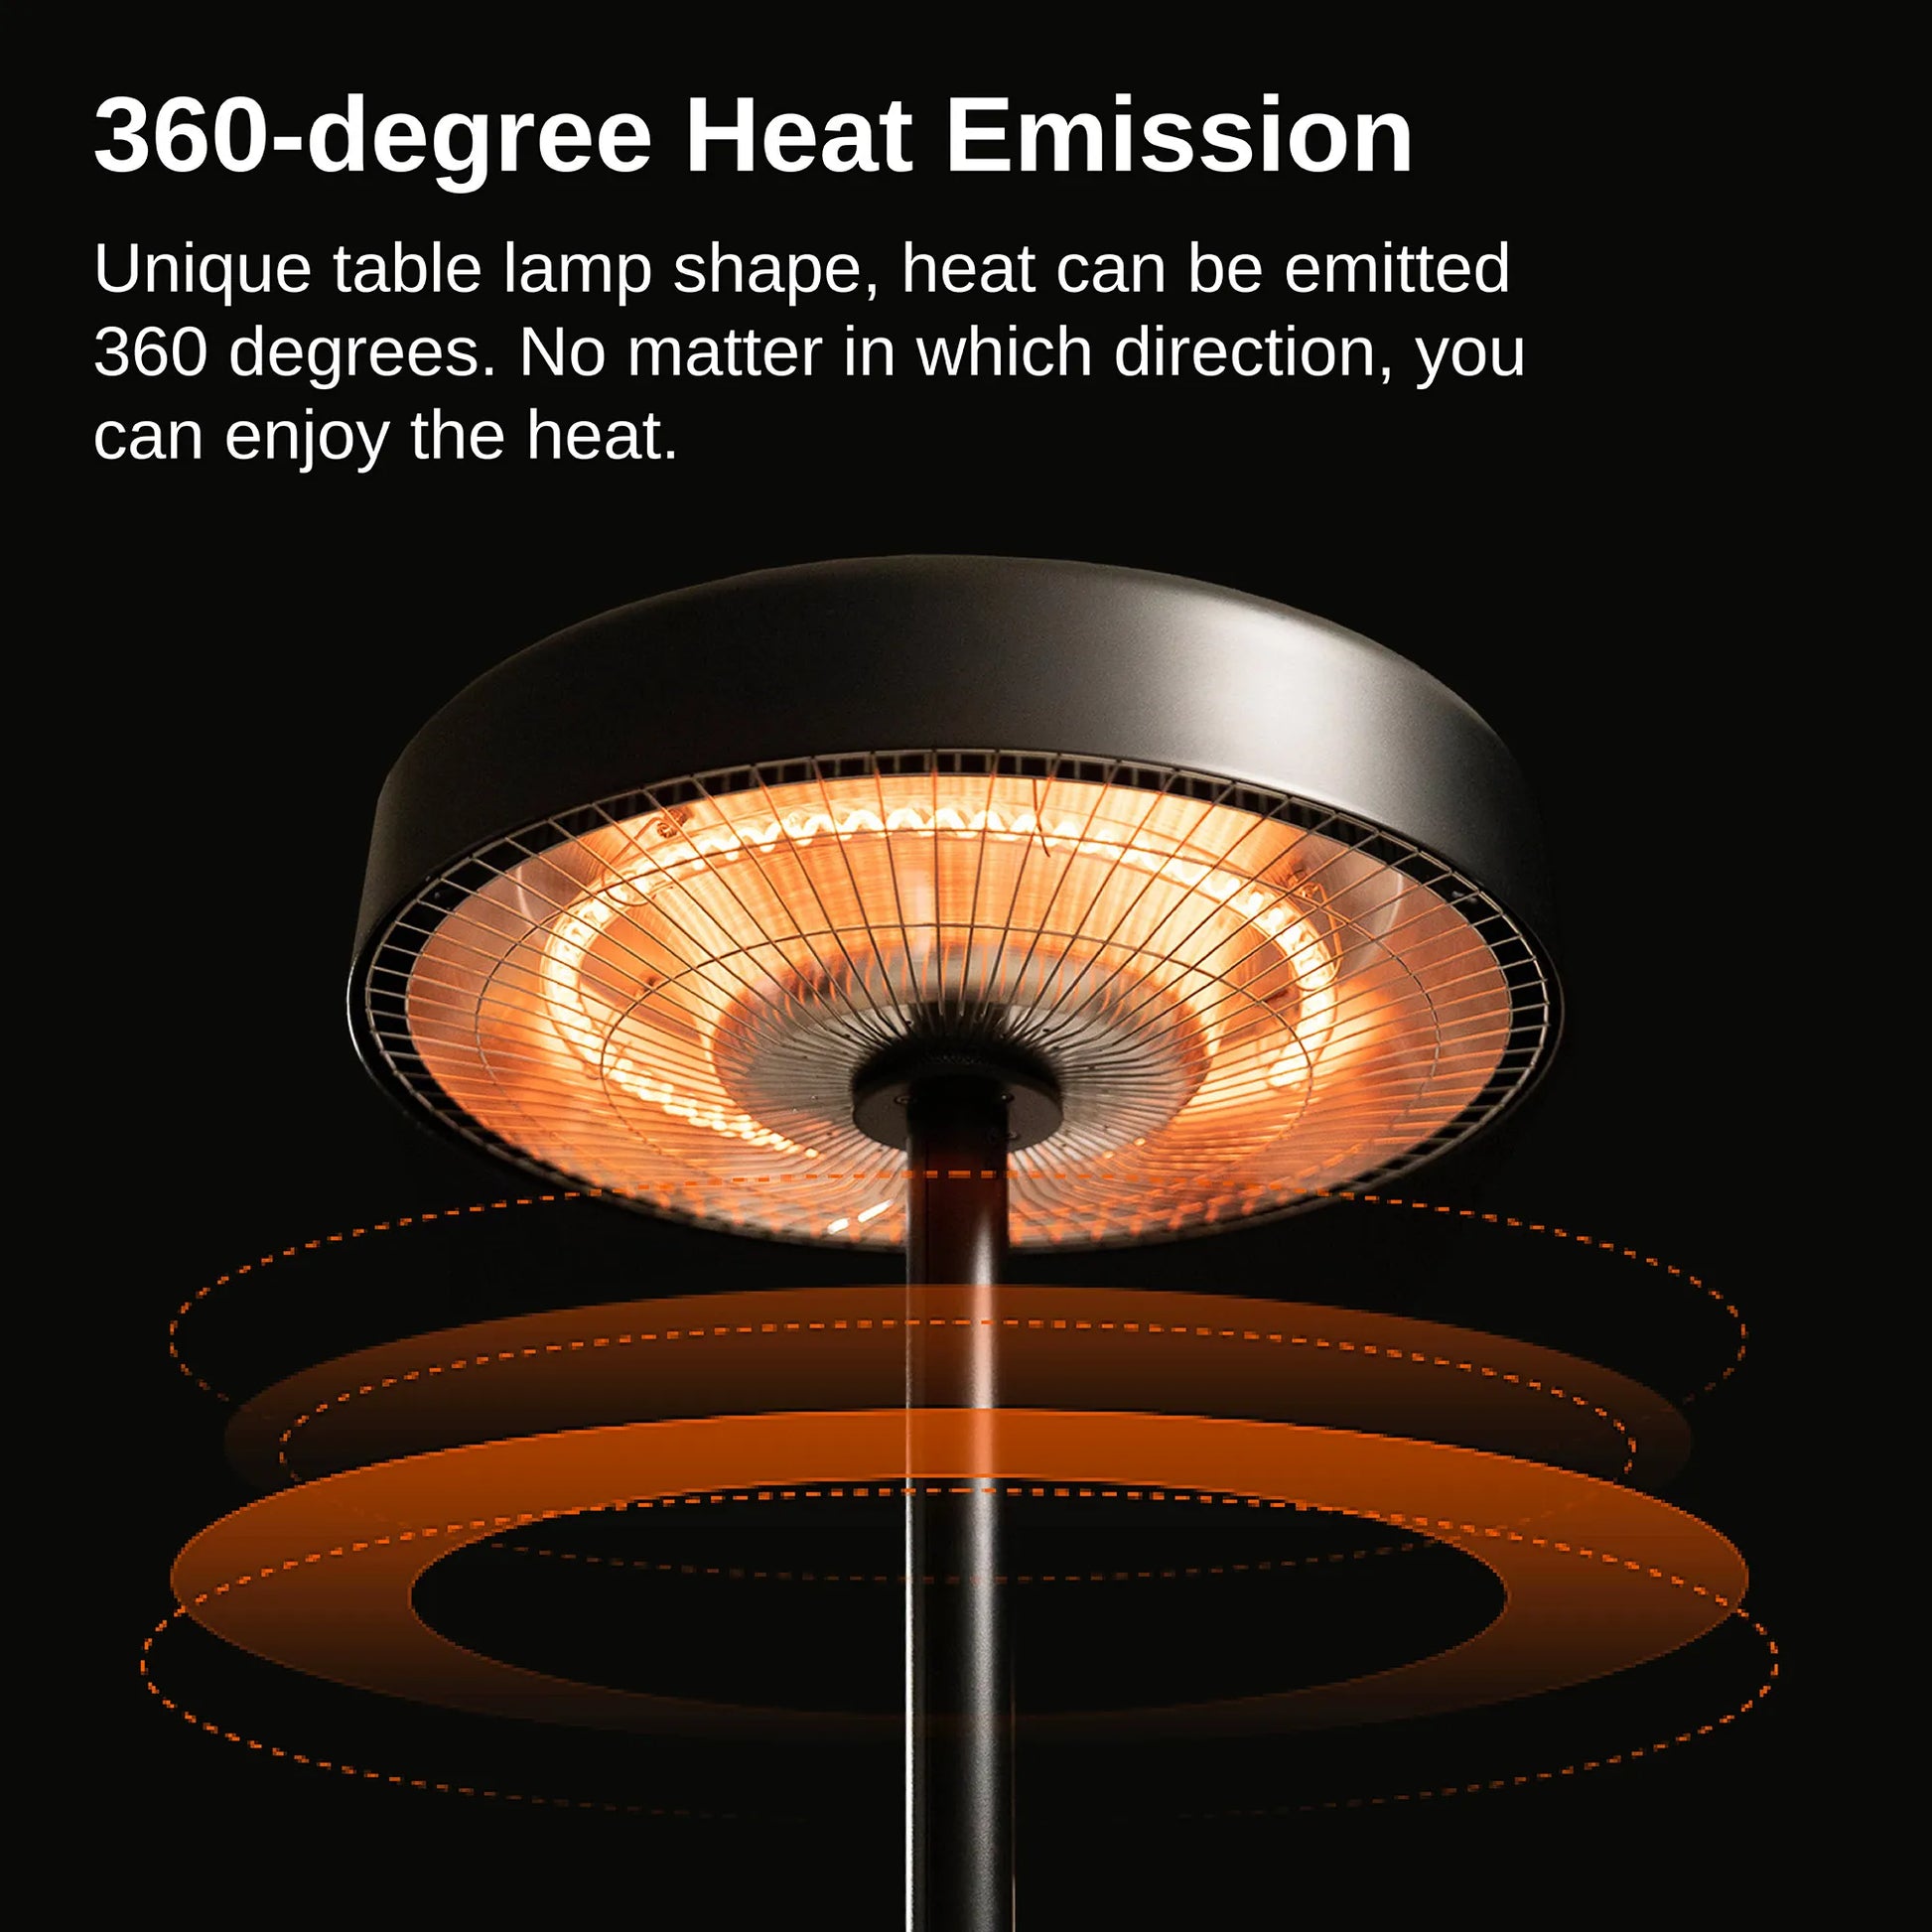 Tabletop-Outdoor-Patio-Electric-Heater-360-Degree-Heat